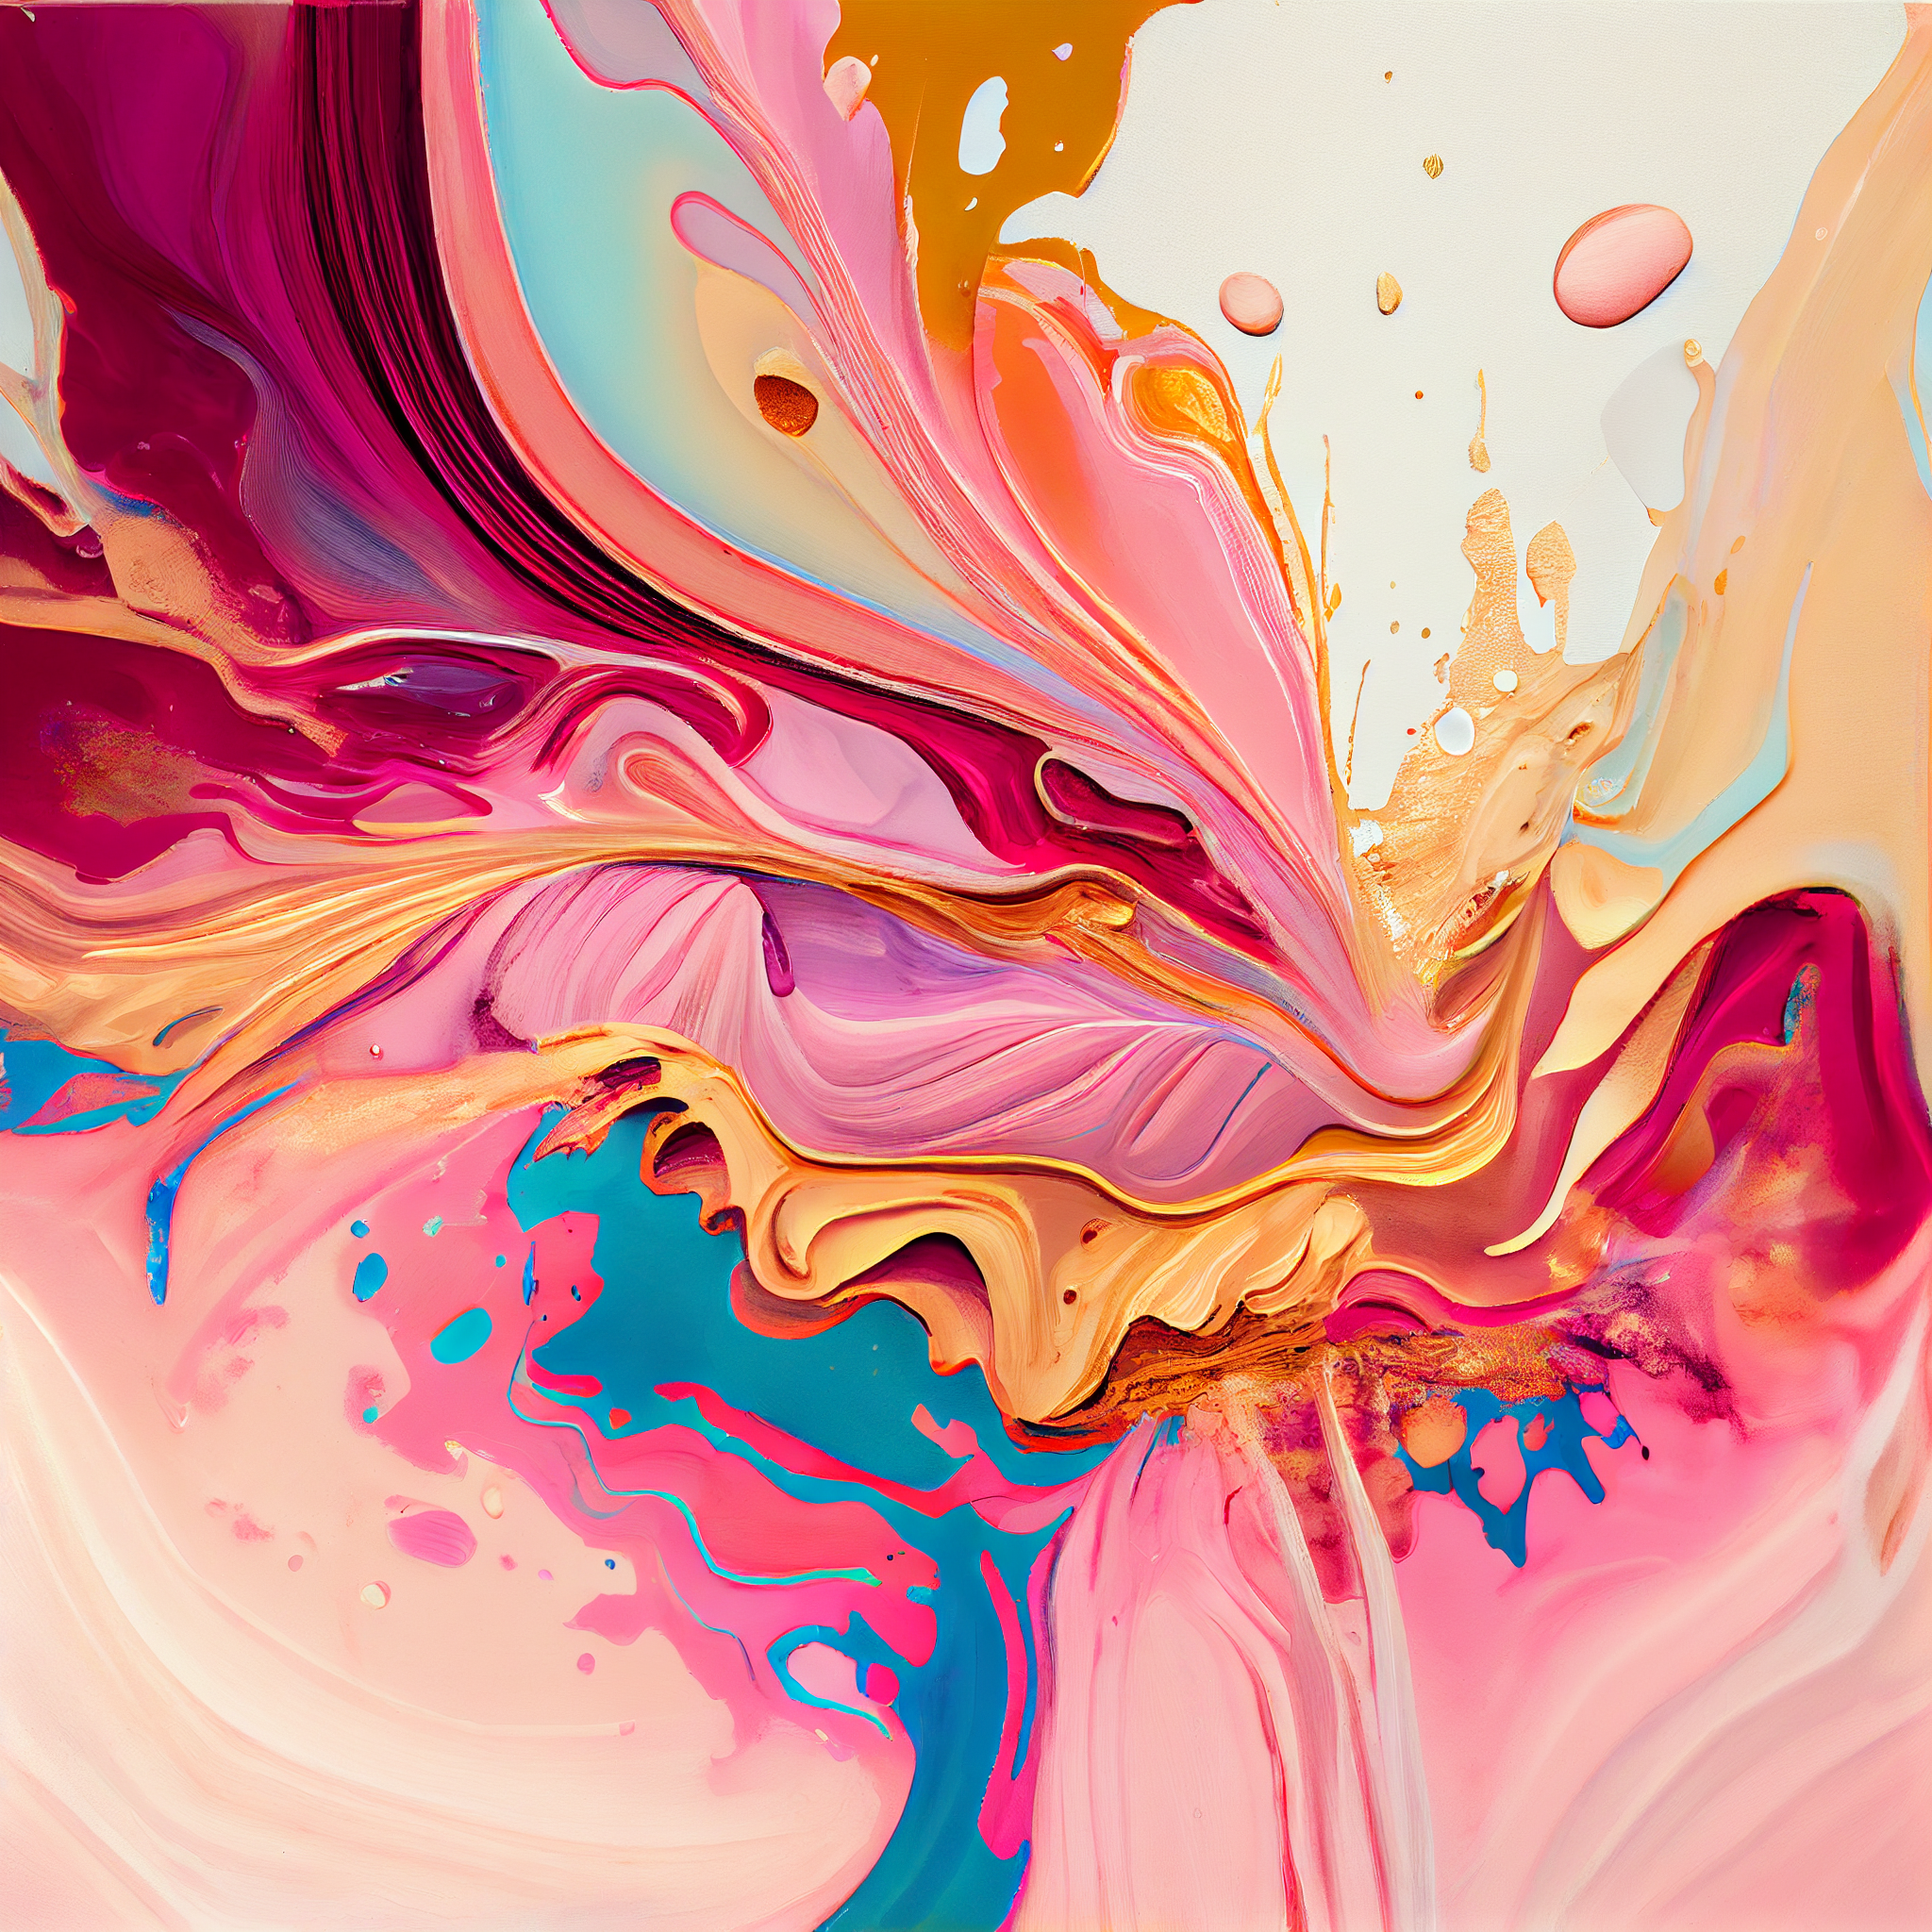 Golden Sunrise: A Vibrant Acrylic Fluid Art Print in Pink, Magenta, Orange, Blue and Yellow Hues